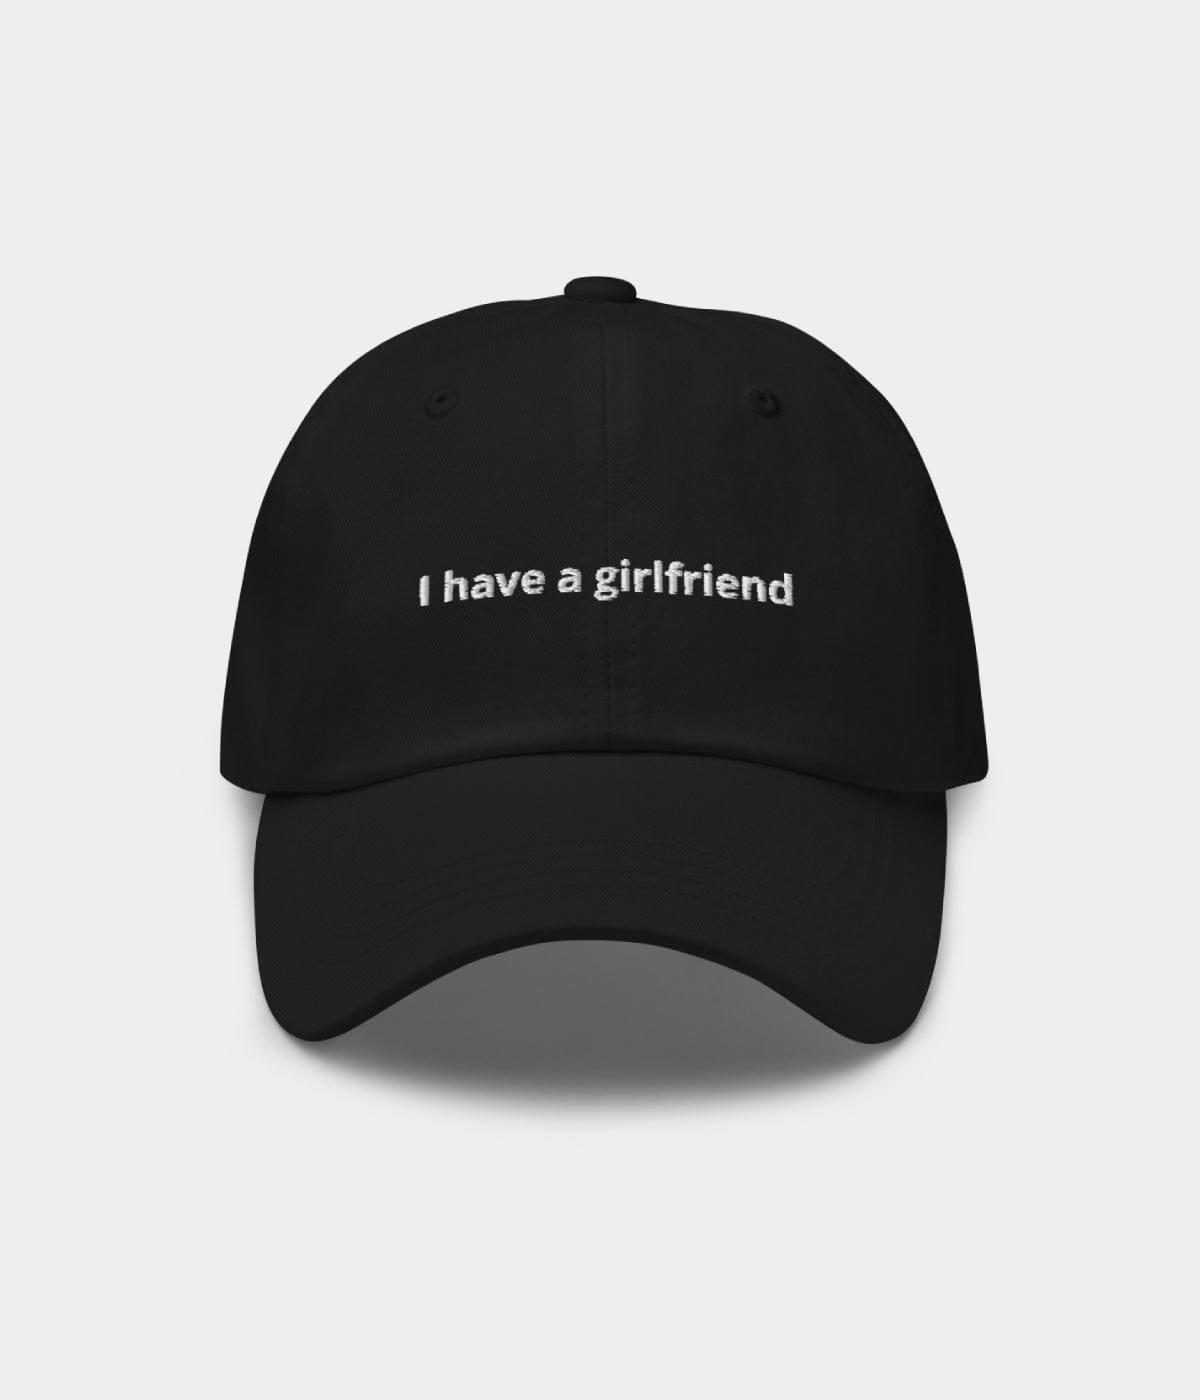 I HAVE A GIRLFRIEND.